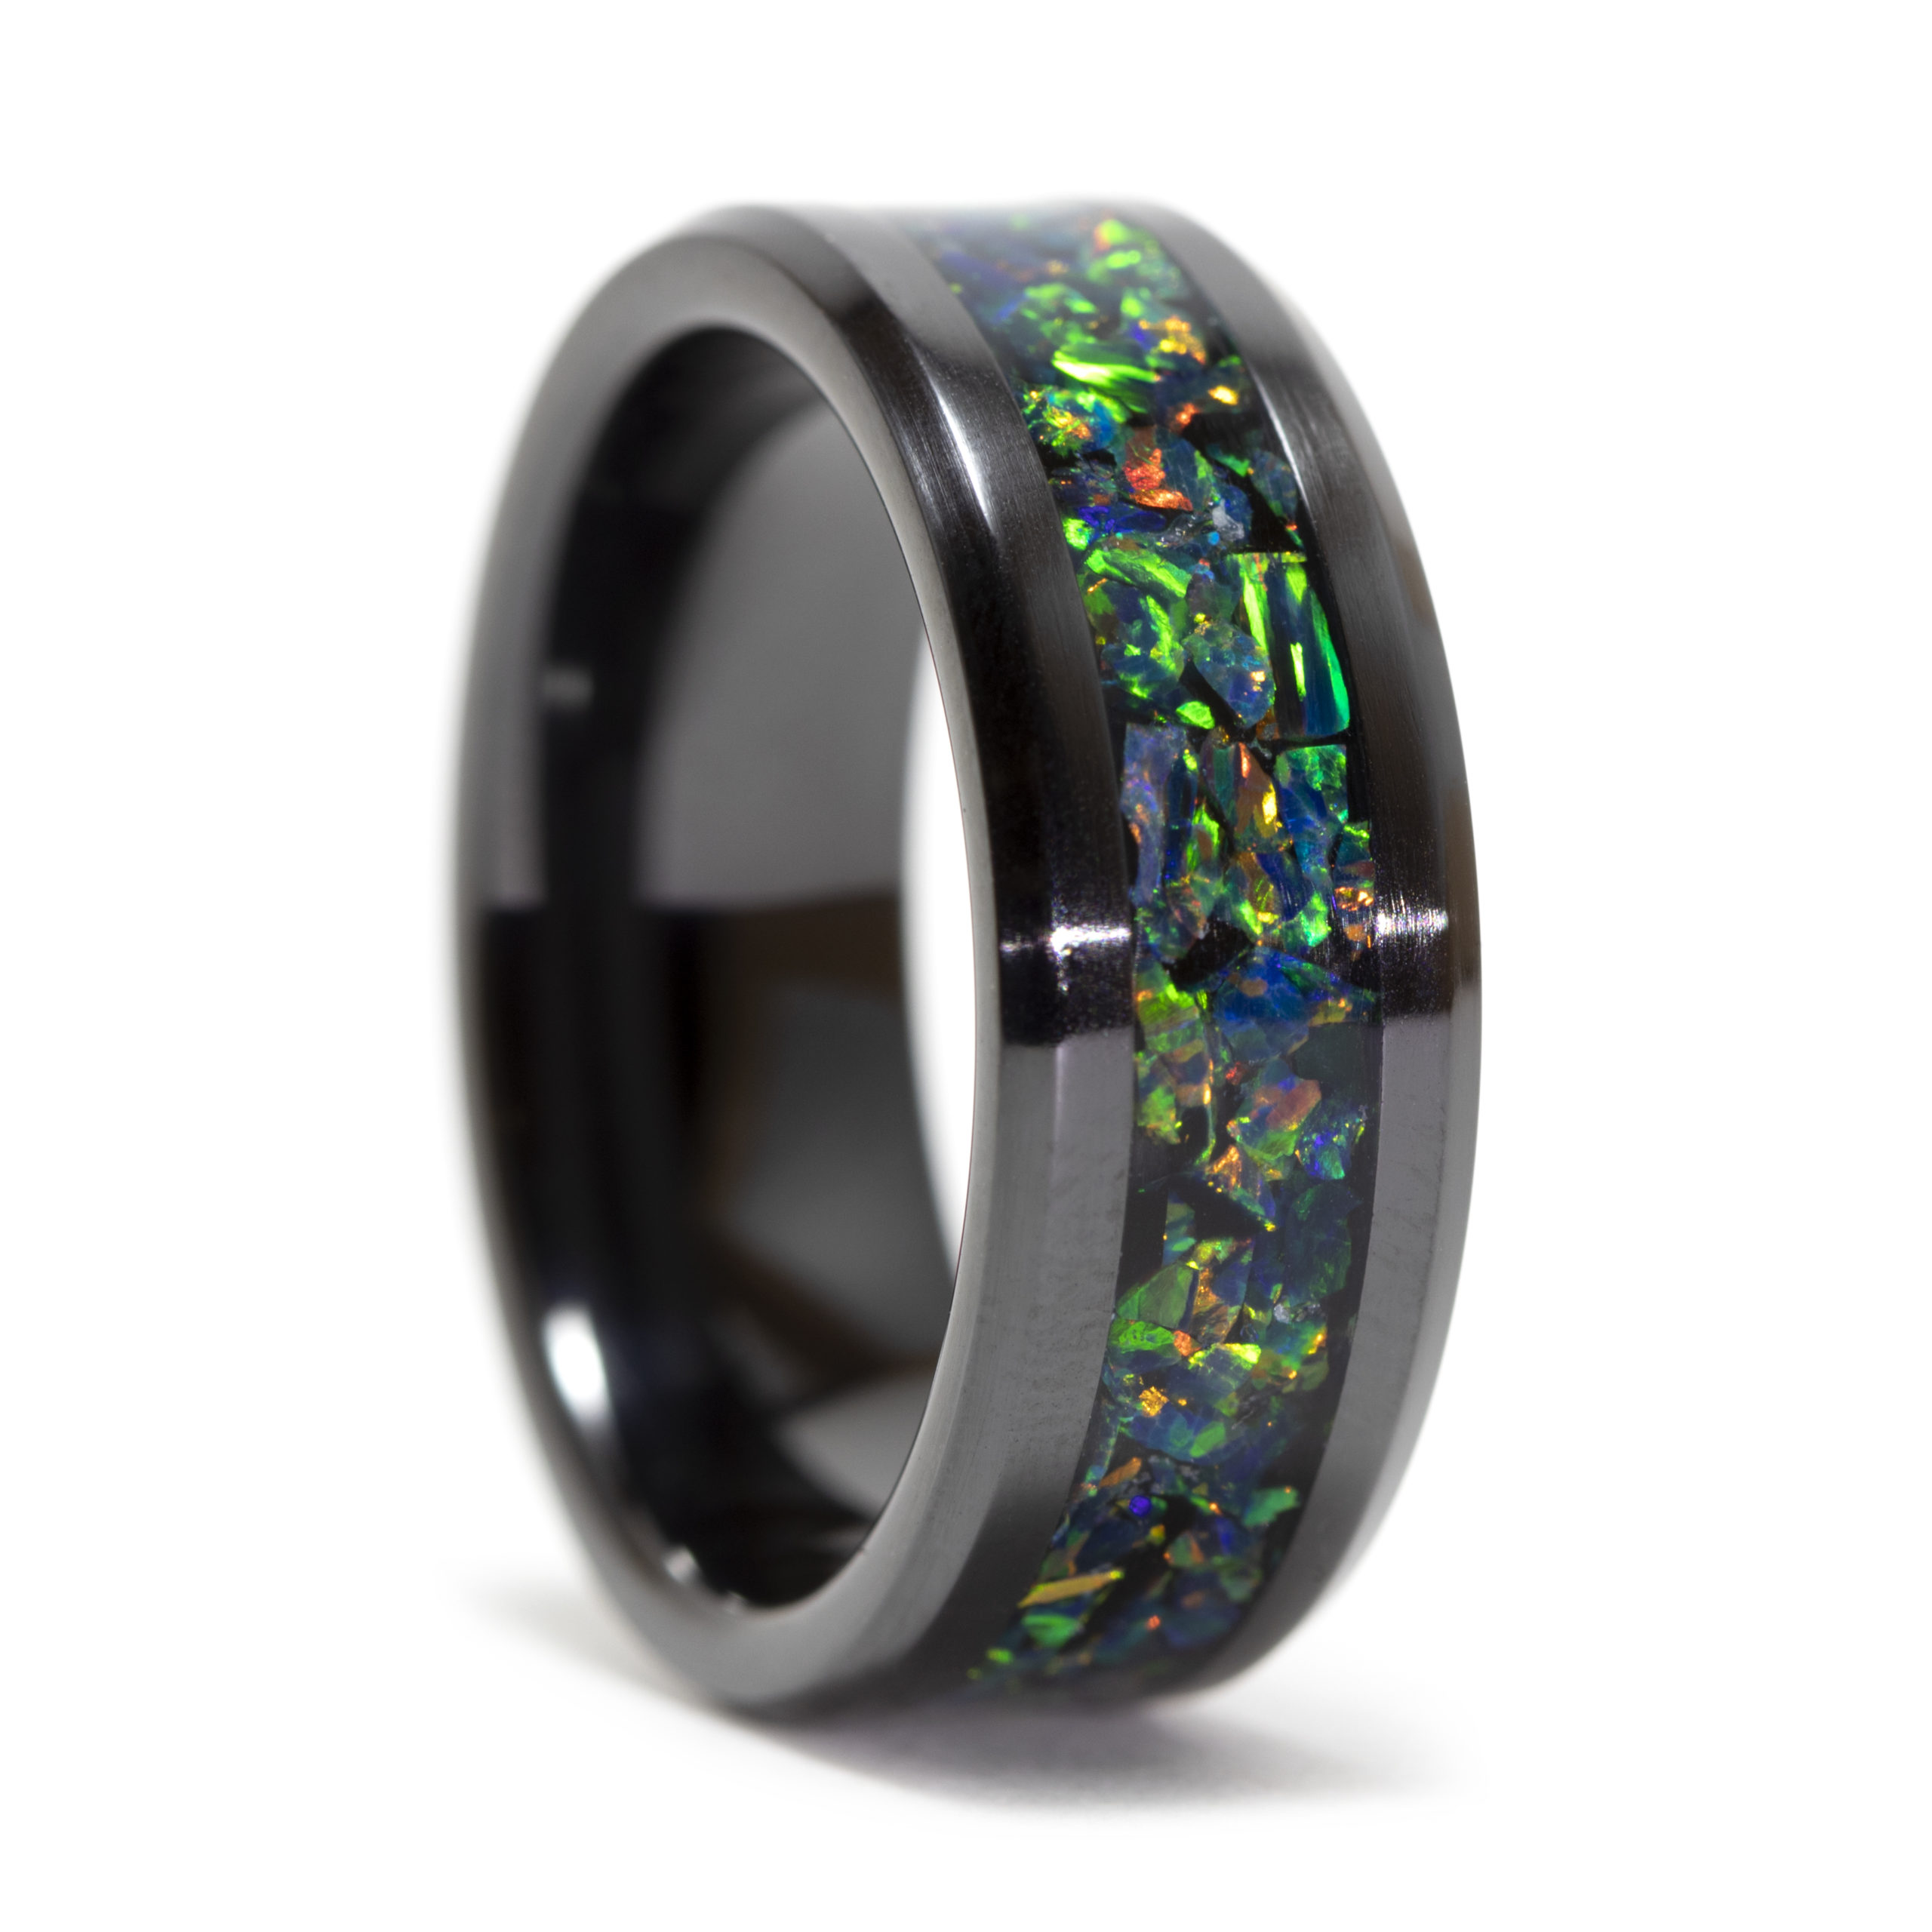 Black Ceramic Ring Inlaid With Alien Blood Stone Opal